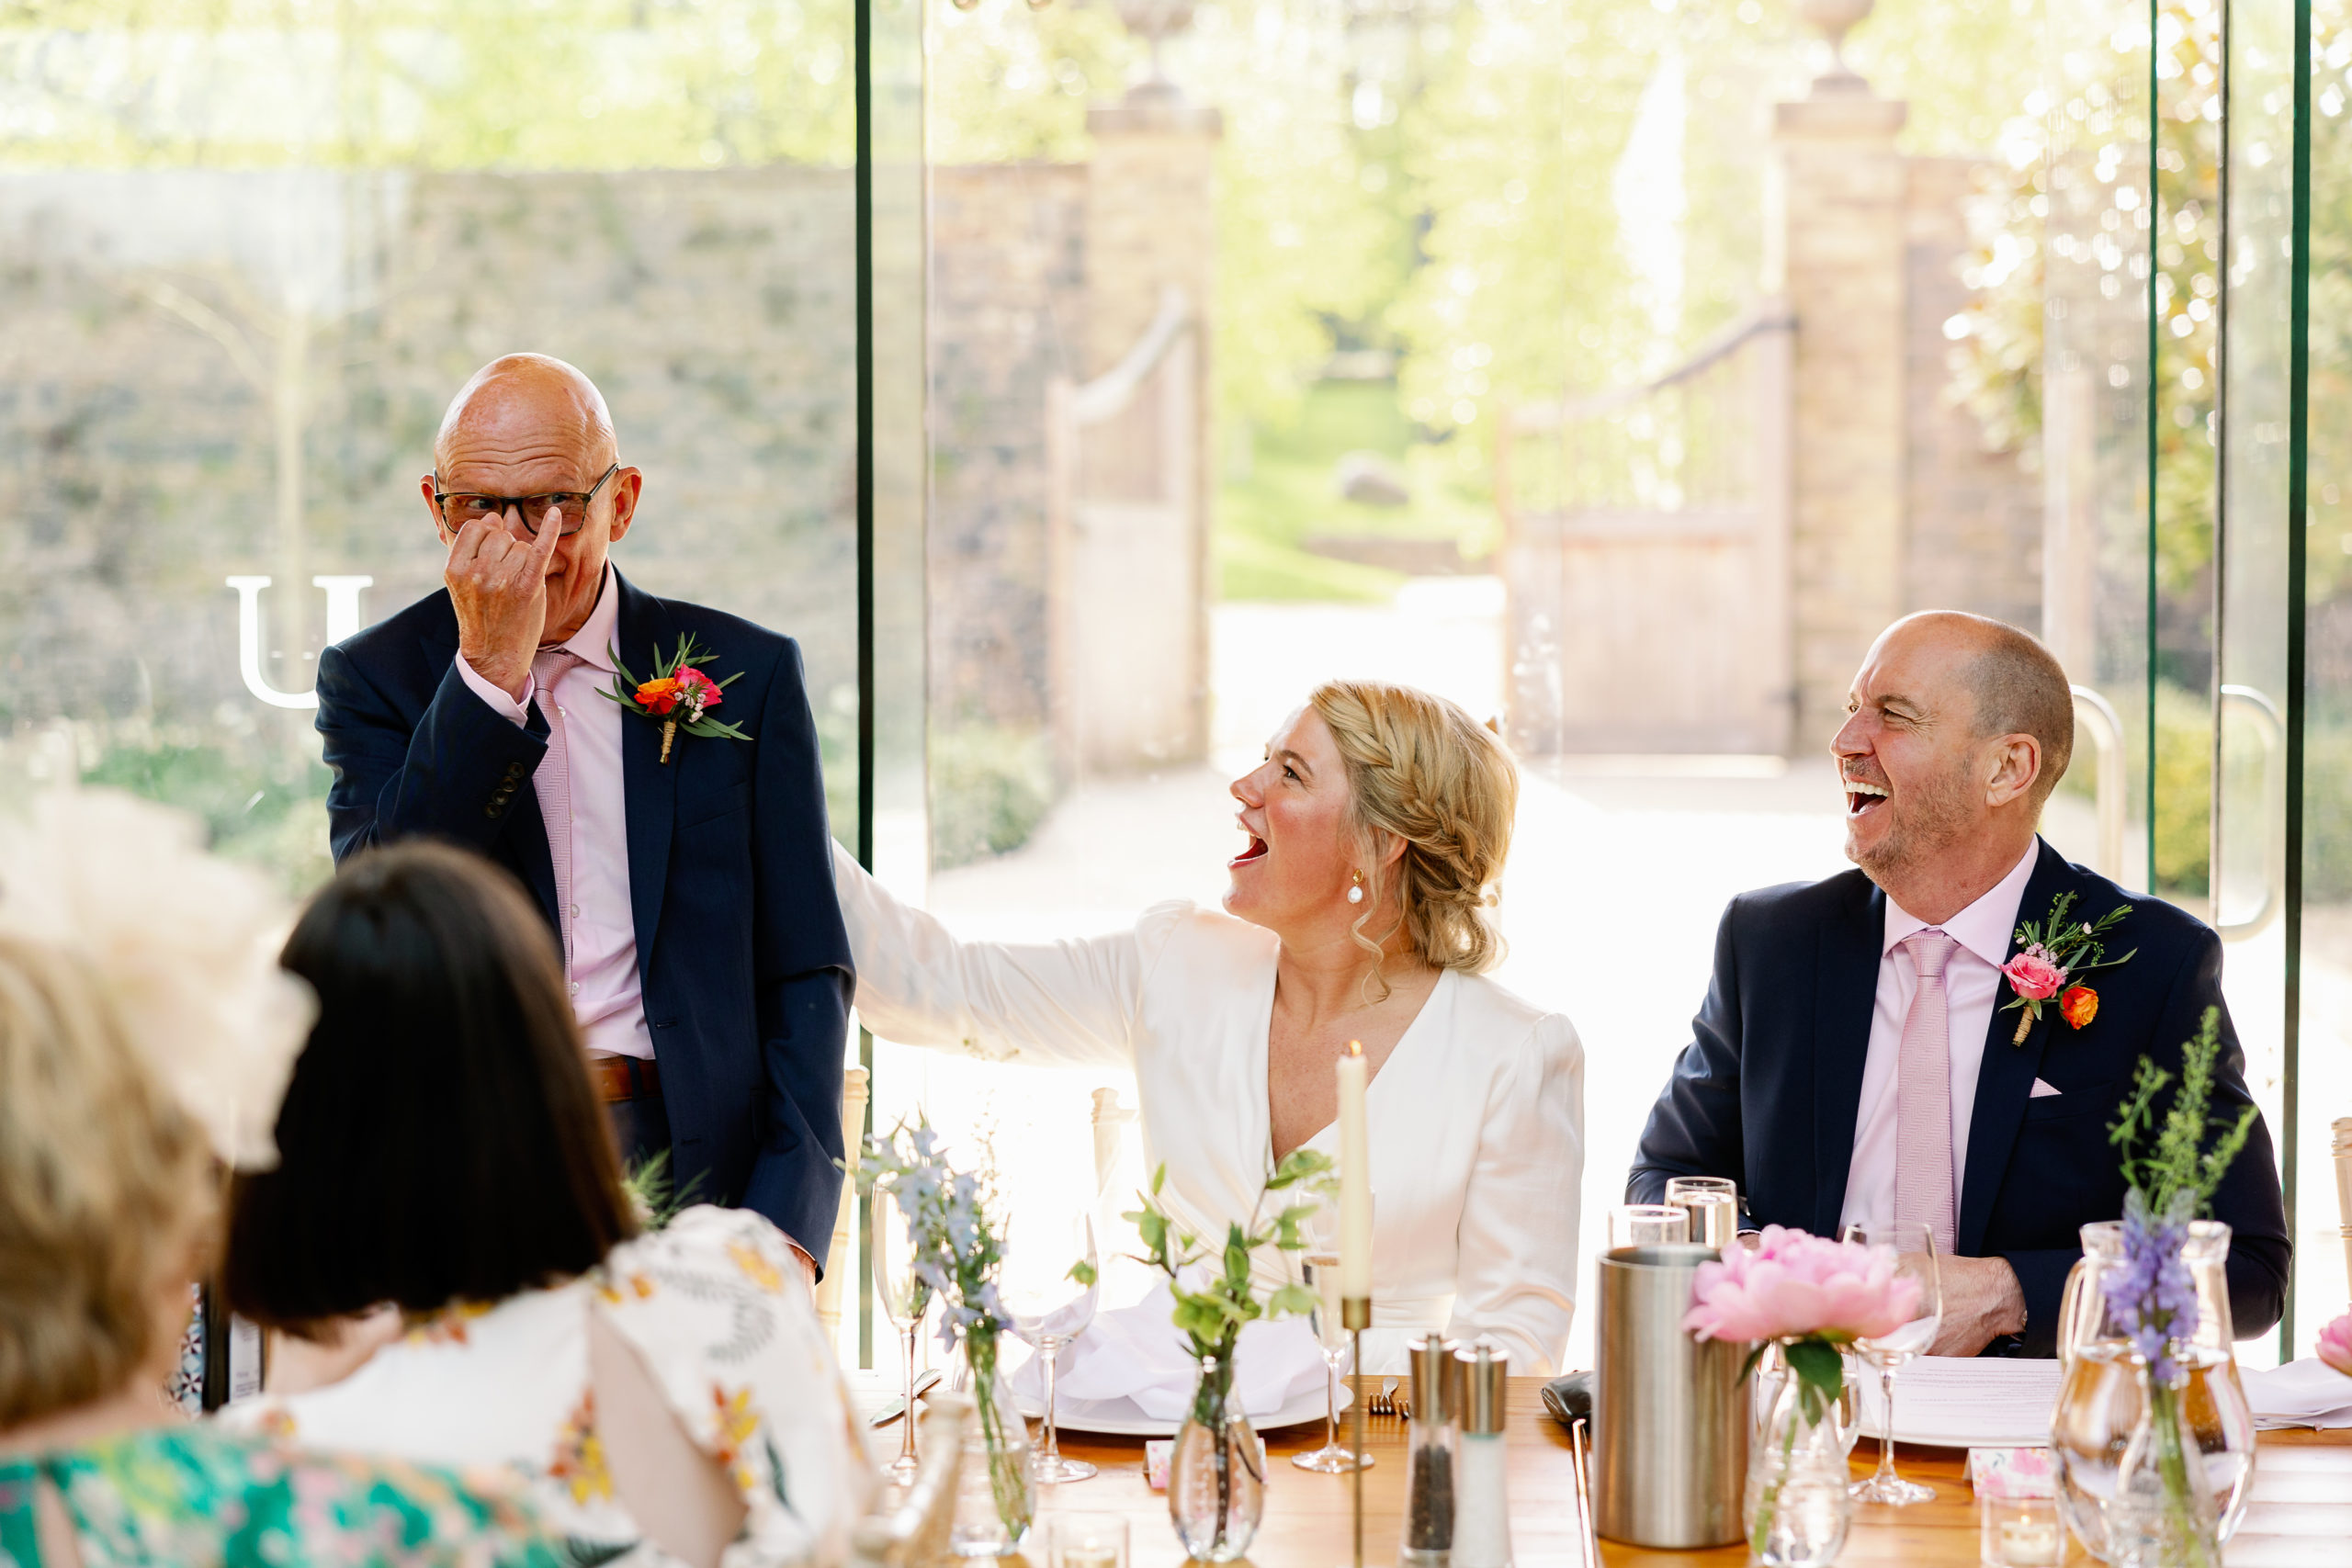 Father of the bride making his speech in a stunning Yorkshire Wedding Venue